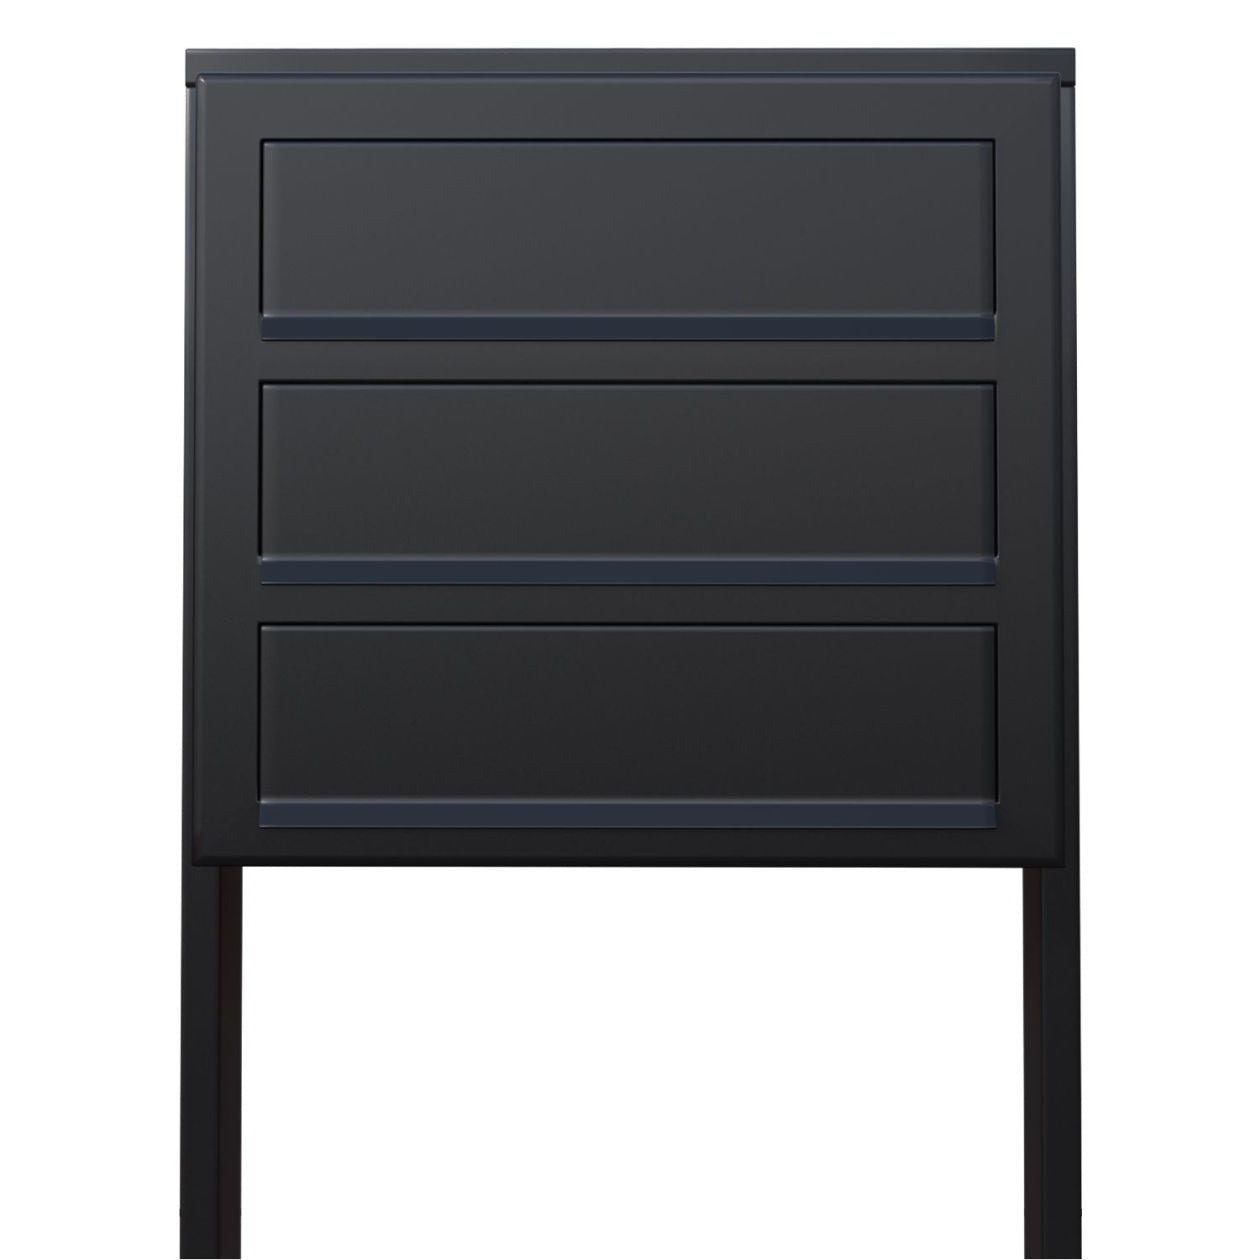 STAND CUBE 3 by Bravios - Modern post-mounted 3-unit black mailbox